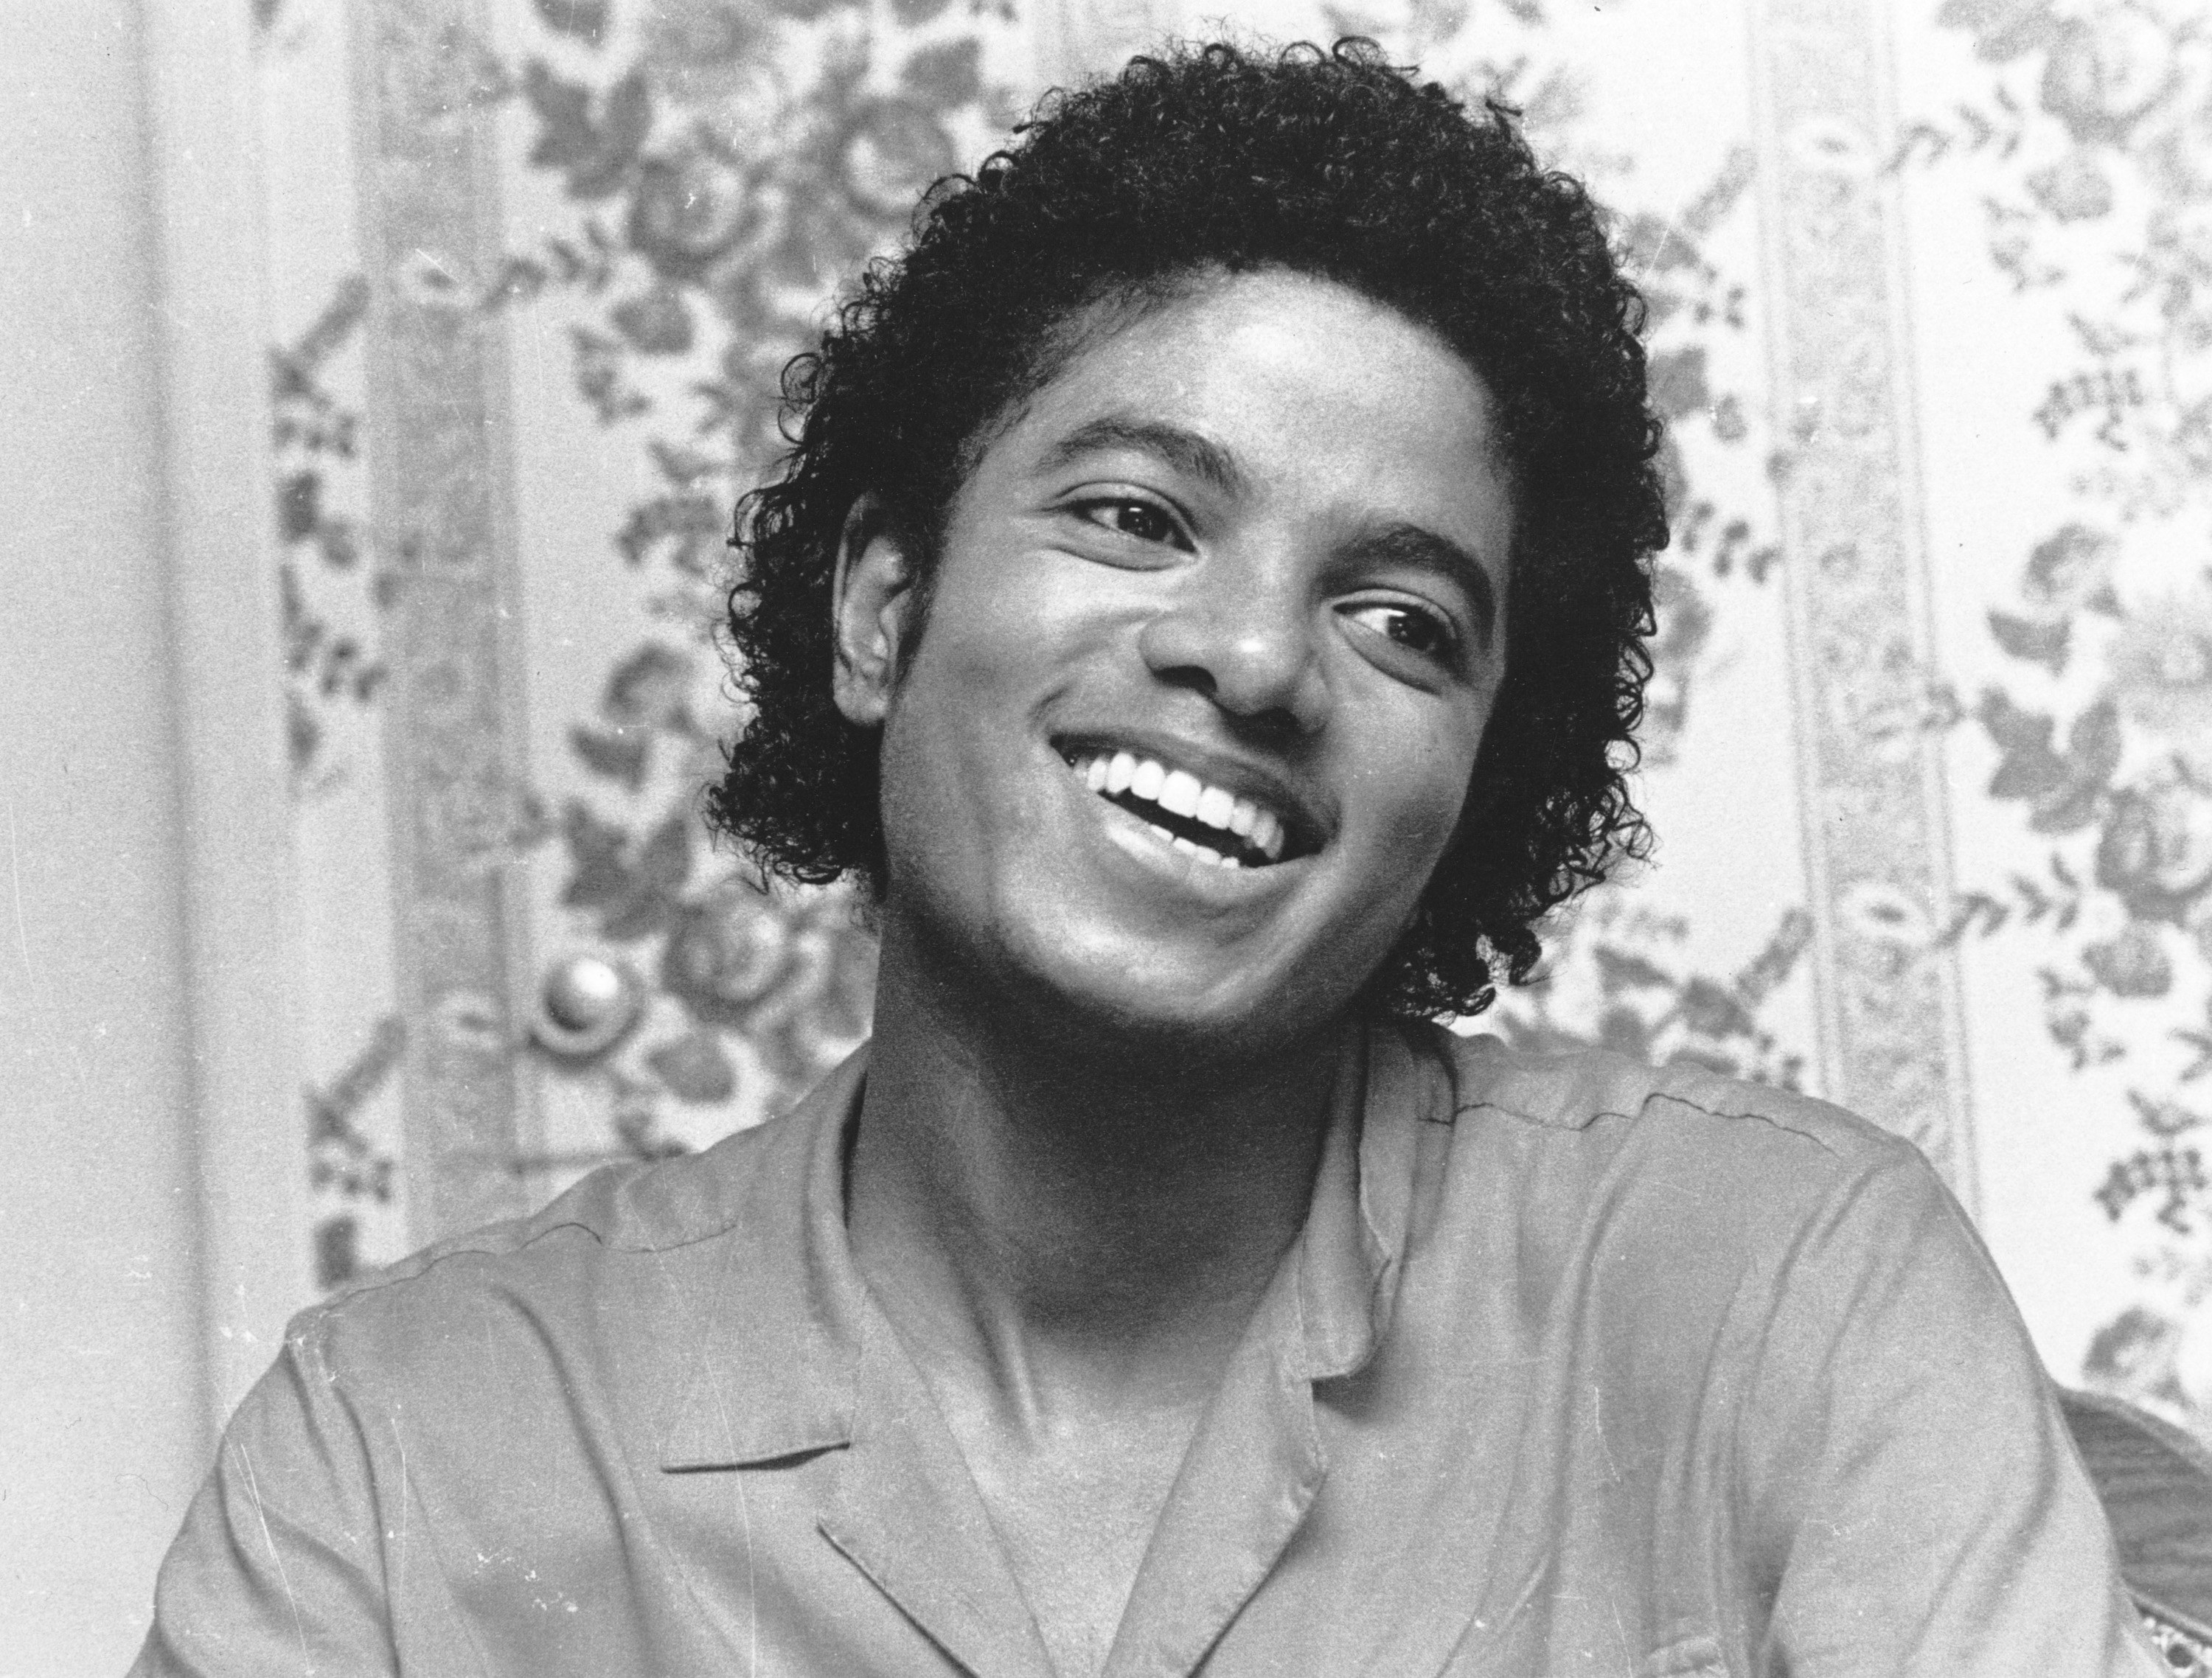 A photo of a smiling Michael Jackson in 1981